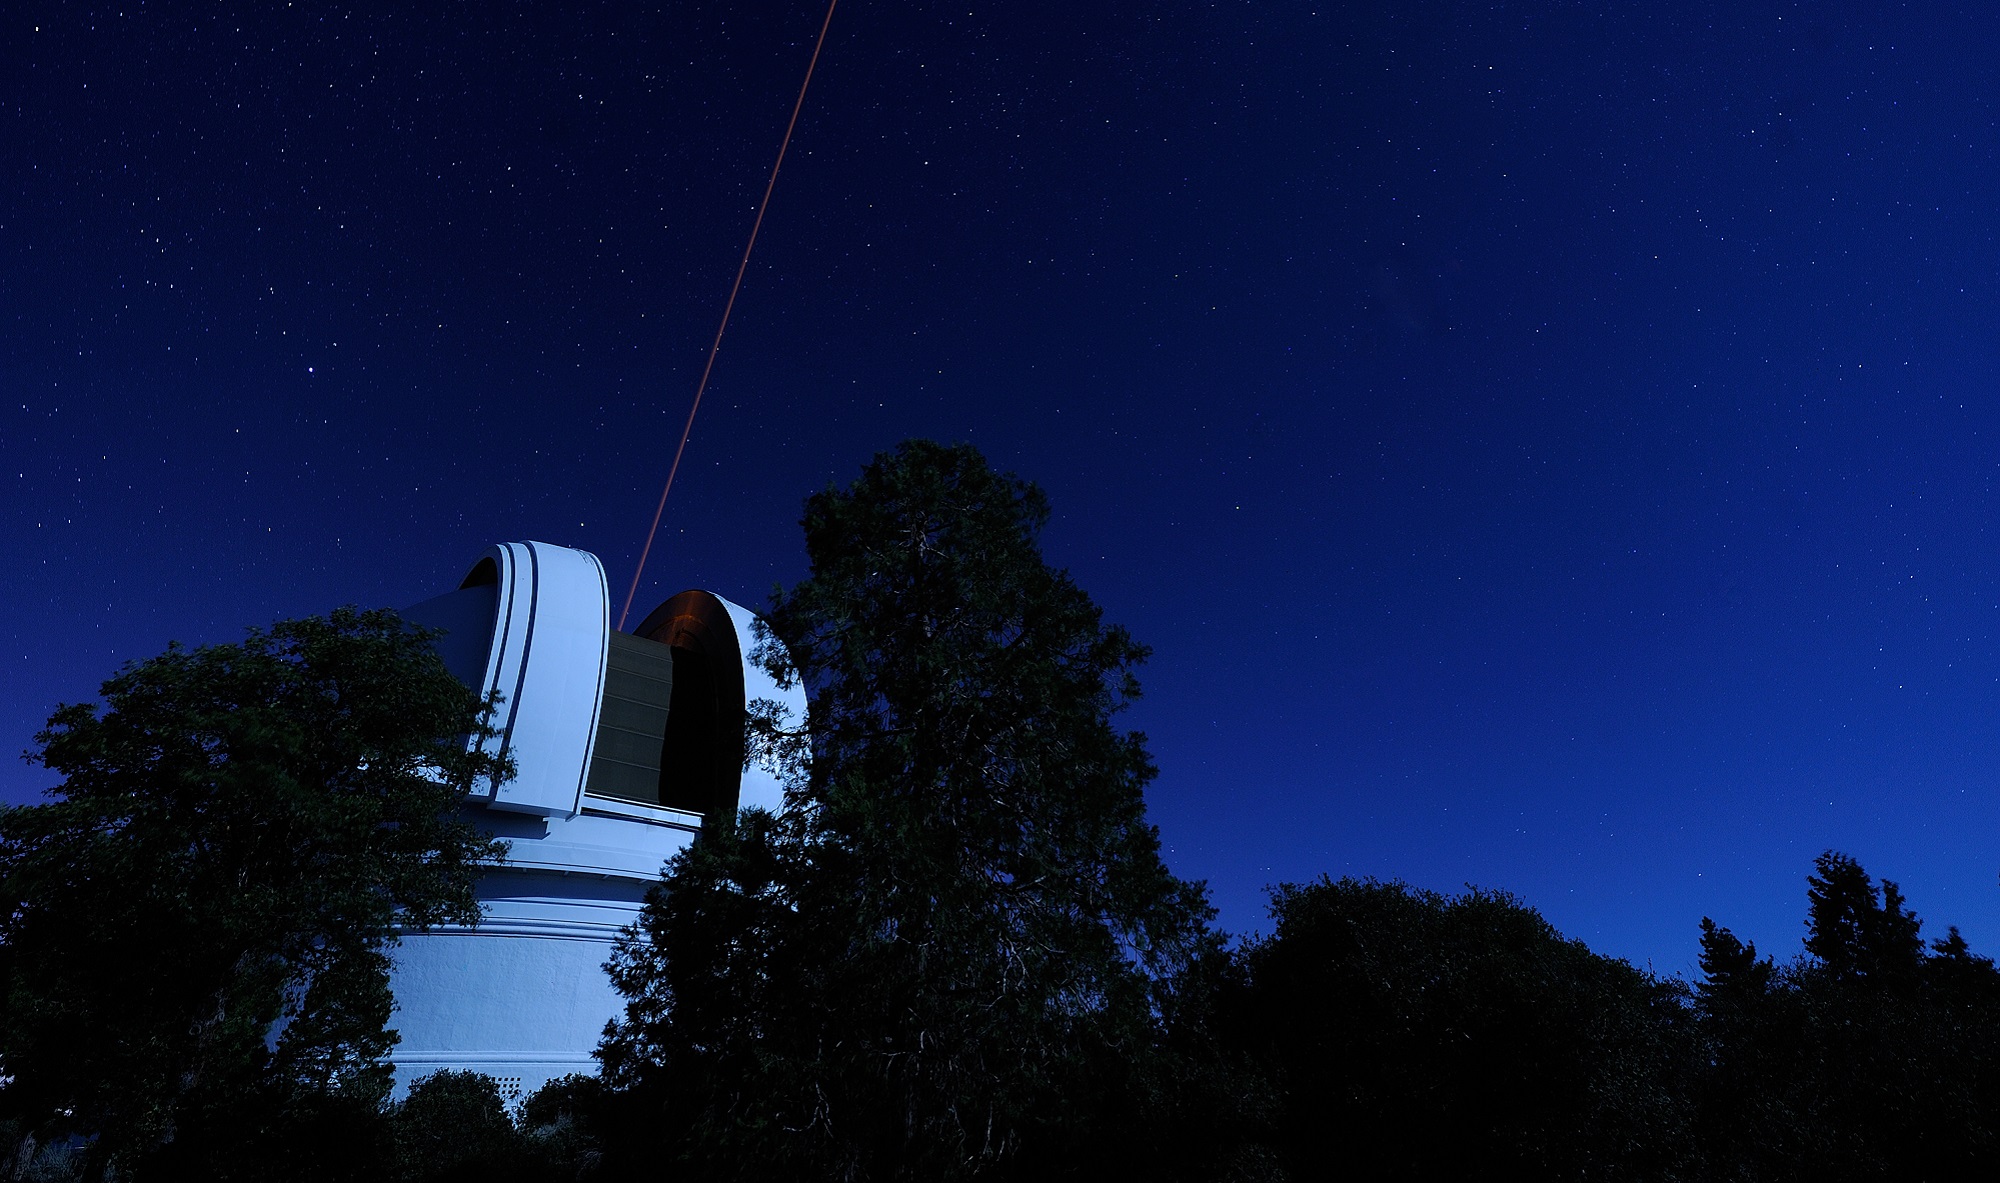 Hale Telescope at Palomar Observatory in California at night was the first to discover the C/2022 E3 (ZTF) comet